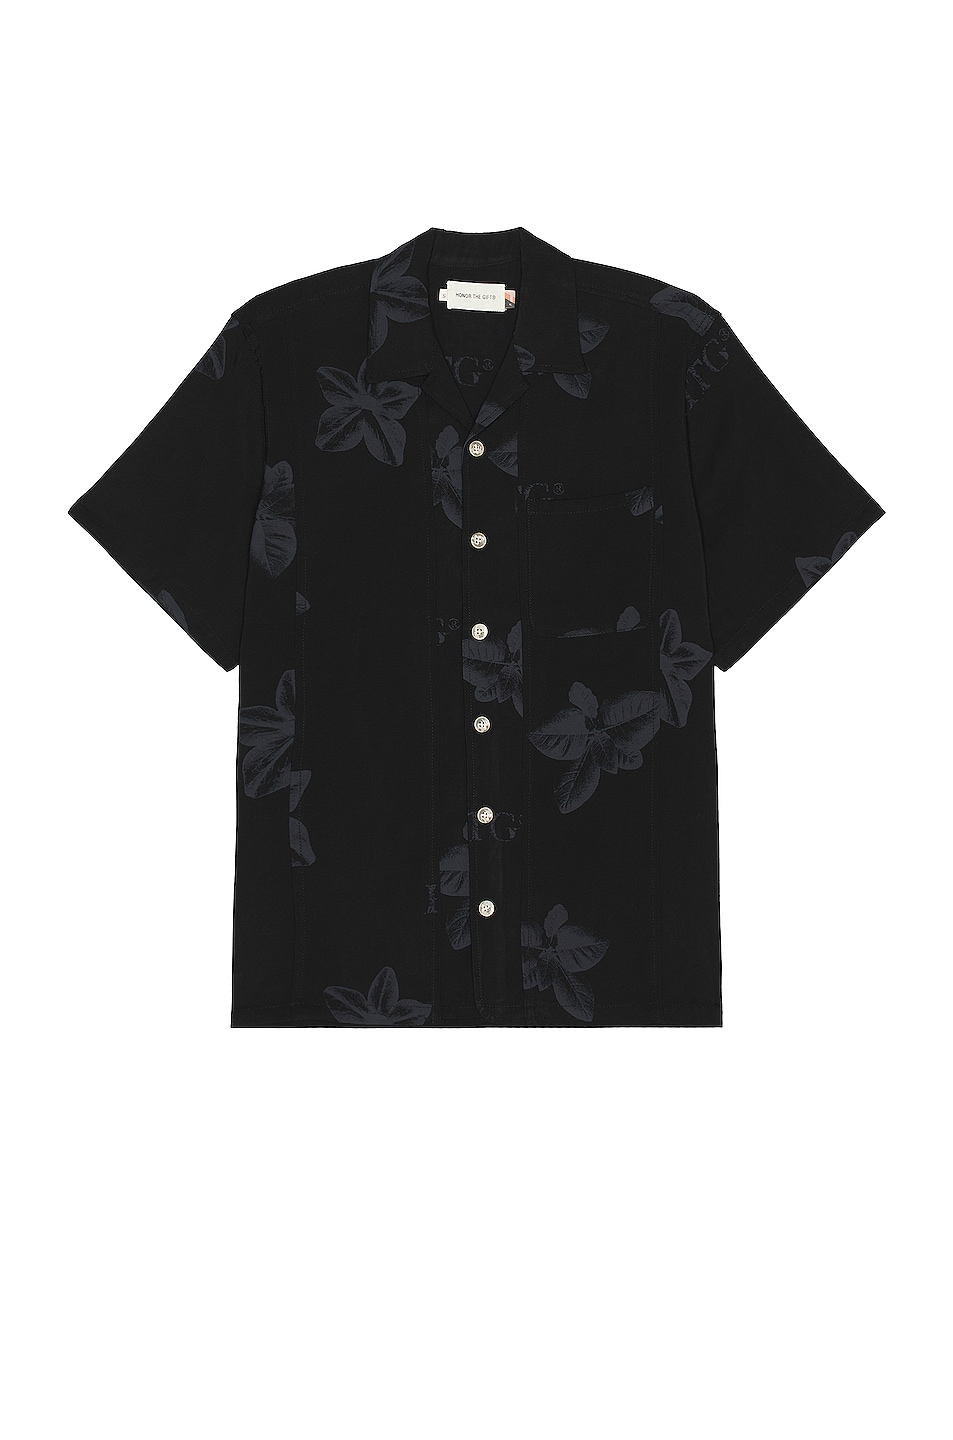 Tobacco Button Up Shirt in Black